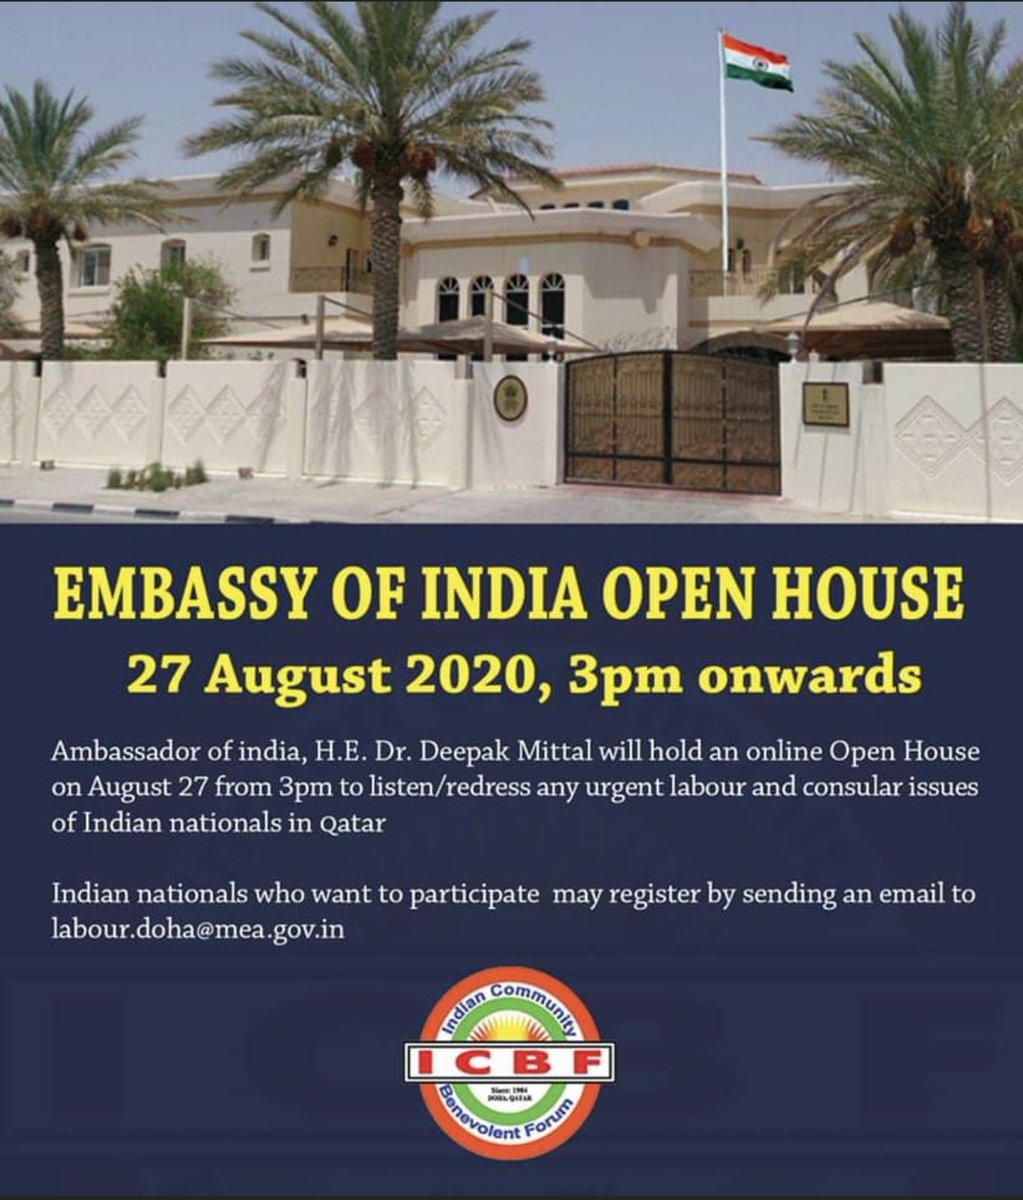 Embassy of India Open House
for Labor and Consular related issues. Register your name if you have any issue related the above subject. 
Email ID: labour.doha@mea.gov.in

#icbfqatar #icbf #teamicbf #ziadusman @ZiadUsman @ICBF_Qatar @d_mittal73